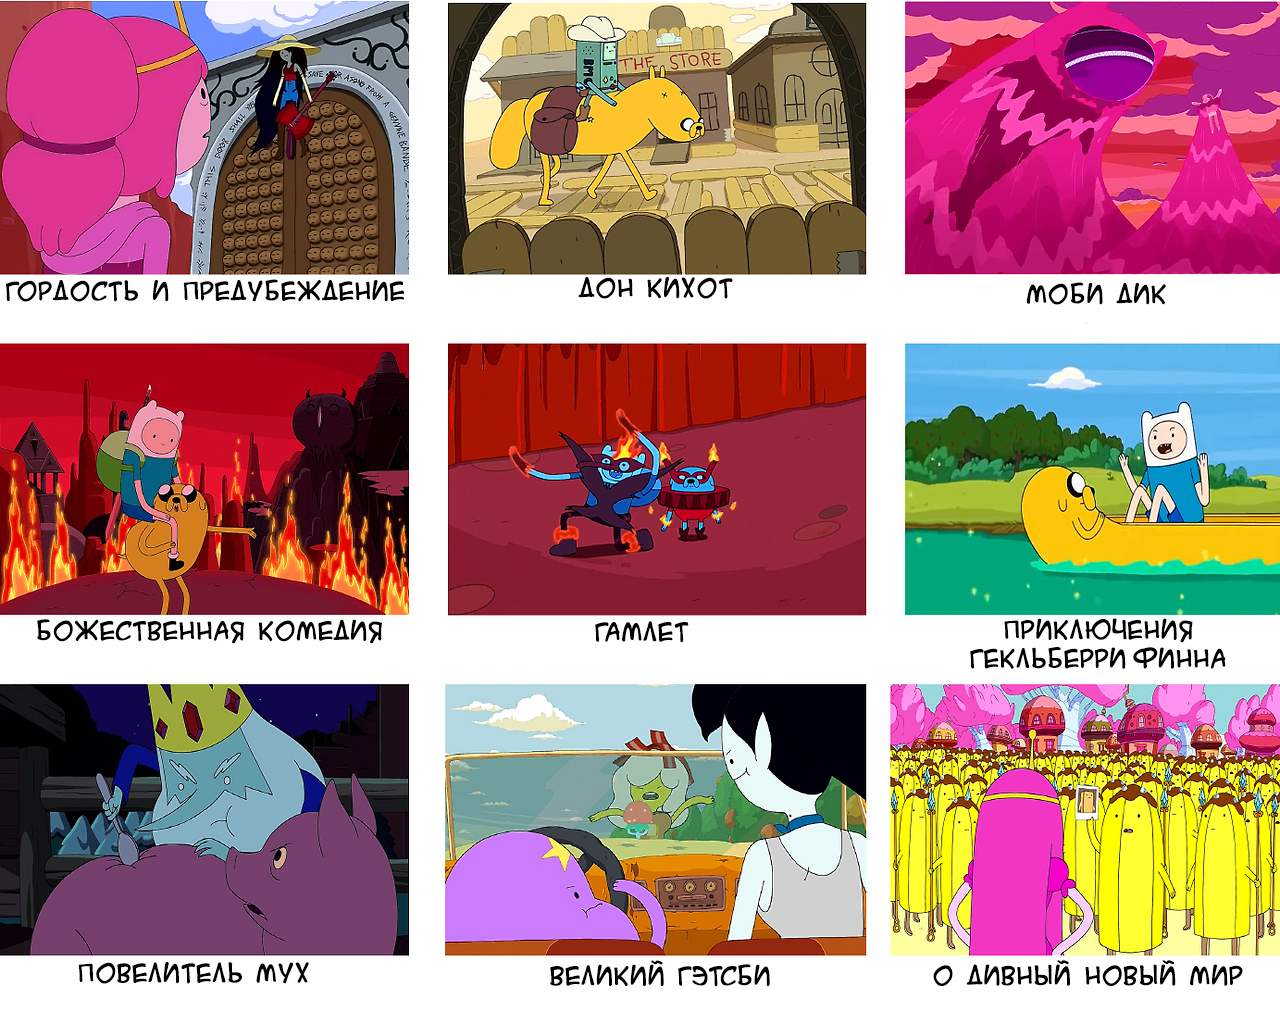 References to famous works in the animated series Adventure Time - Finn the human, Jake, Finn, Referral, Adventure Time